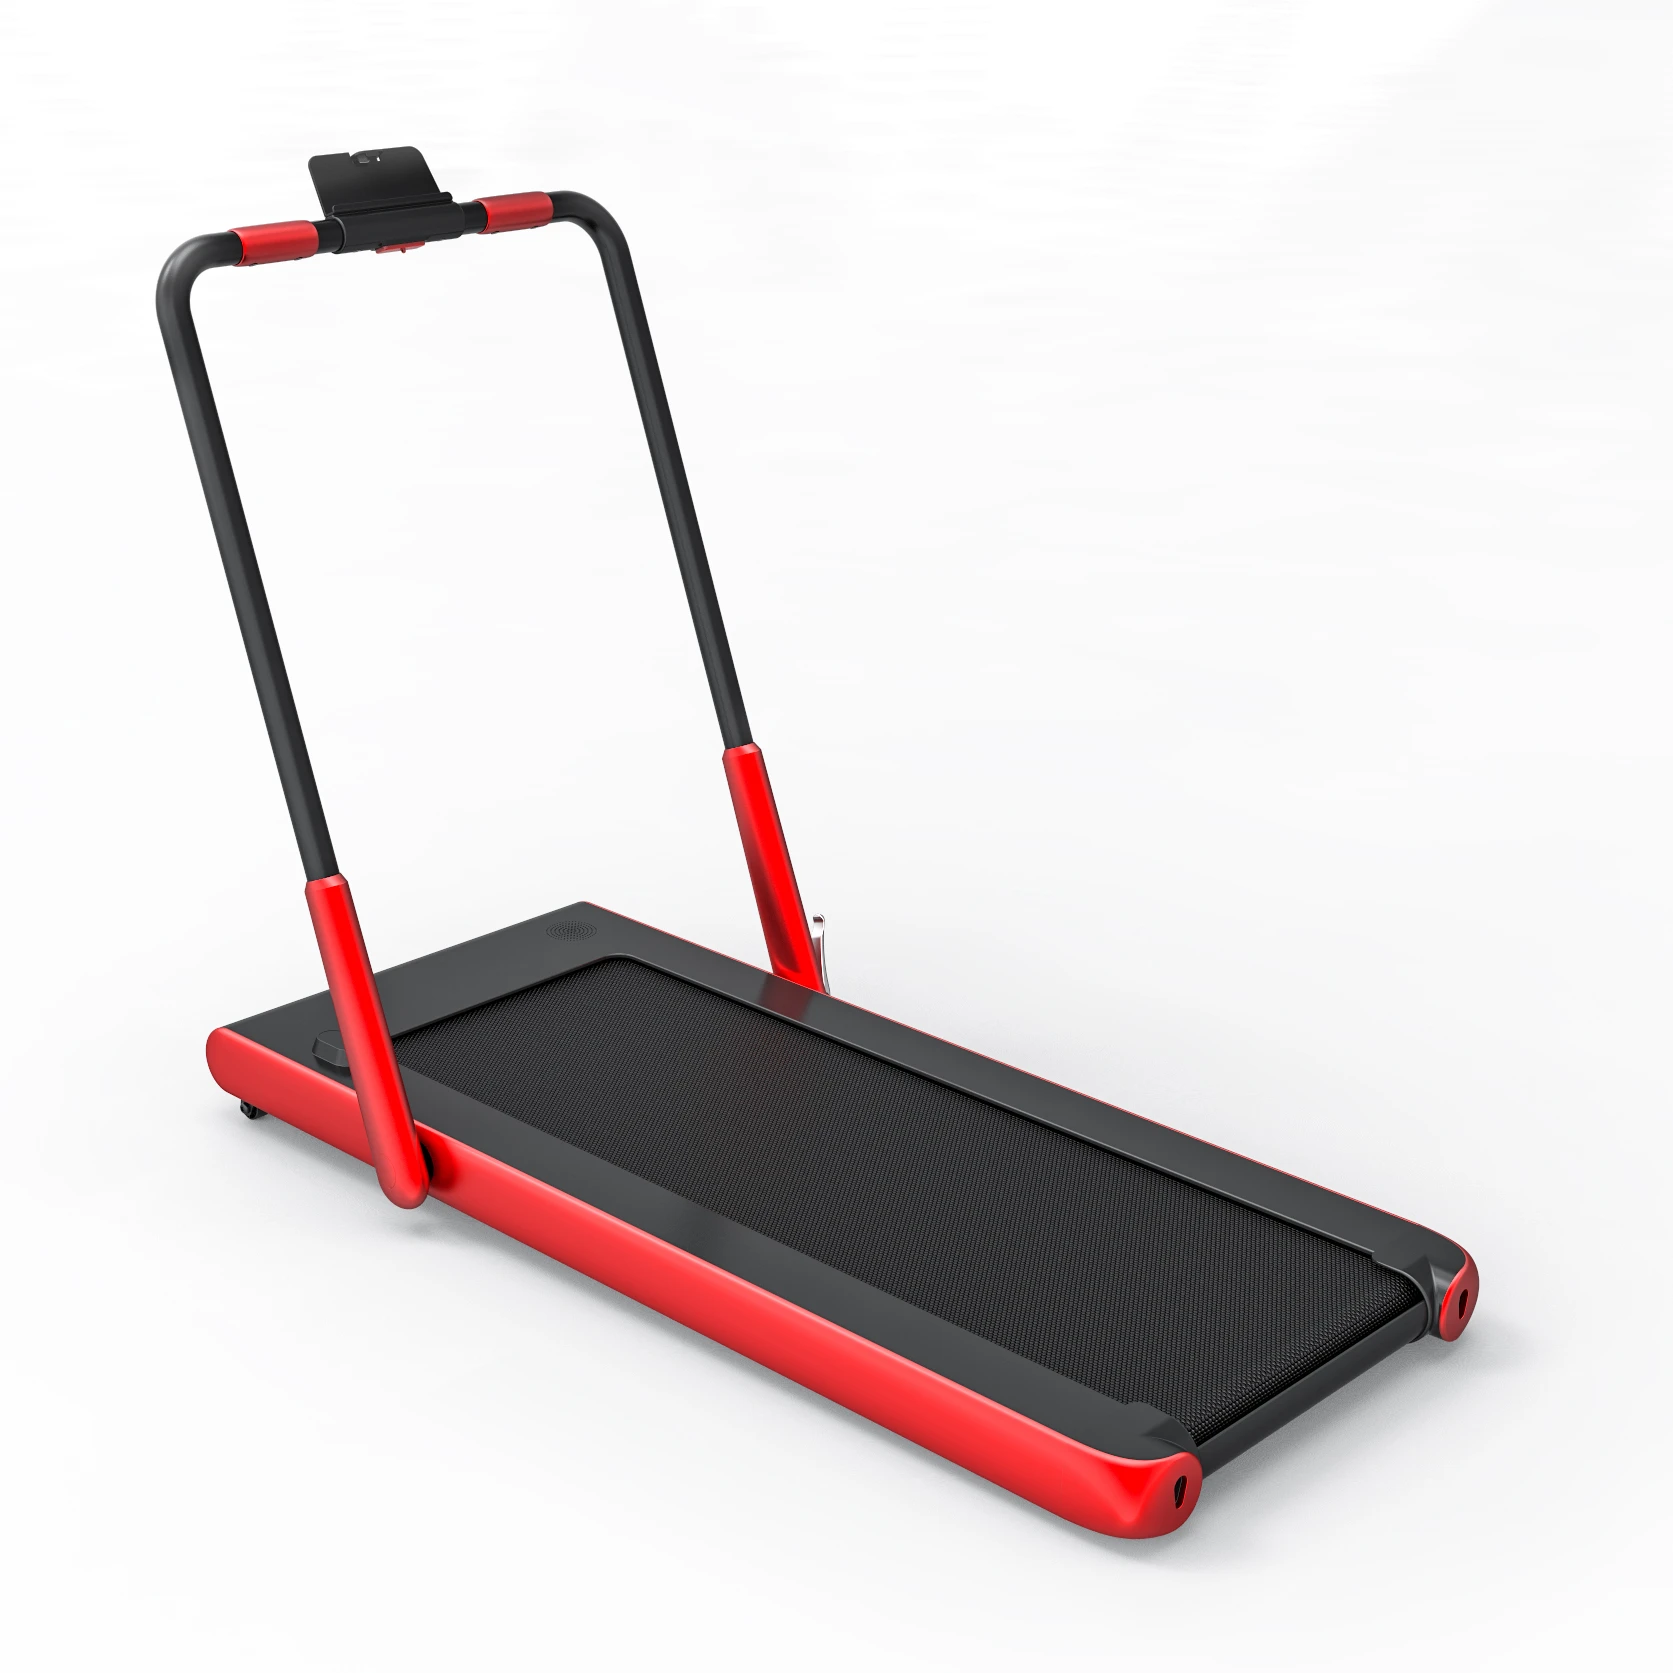 

2021 folding treadmill remote control 2 in 1 design space saving fitness running and walking machine, Silvery/red/blue/black